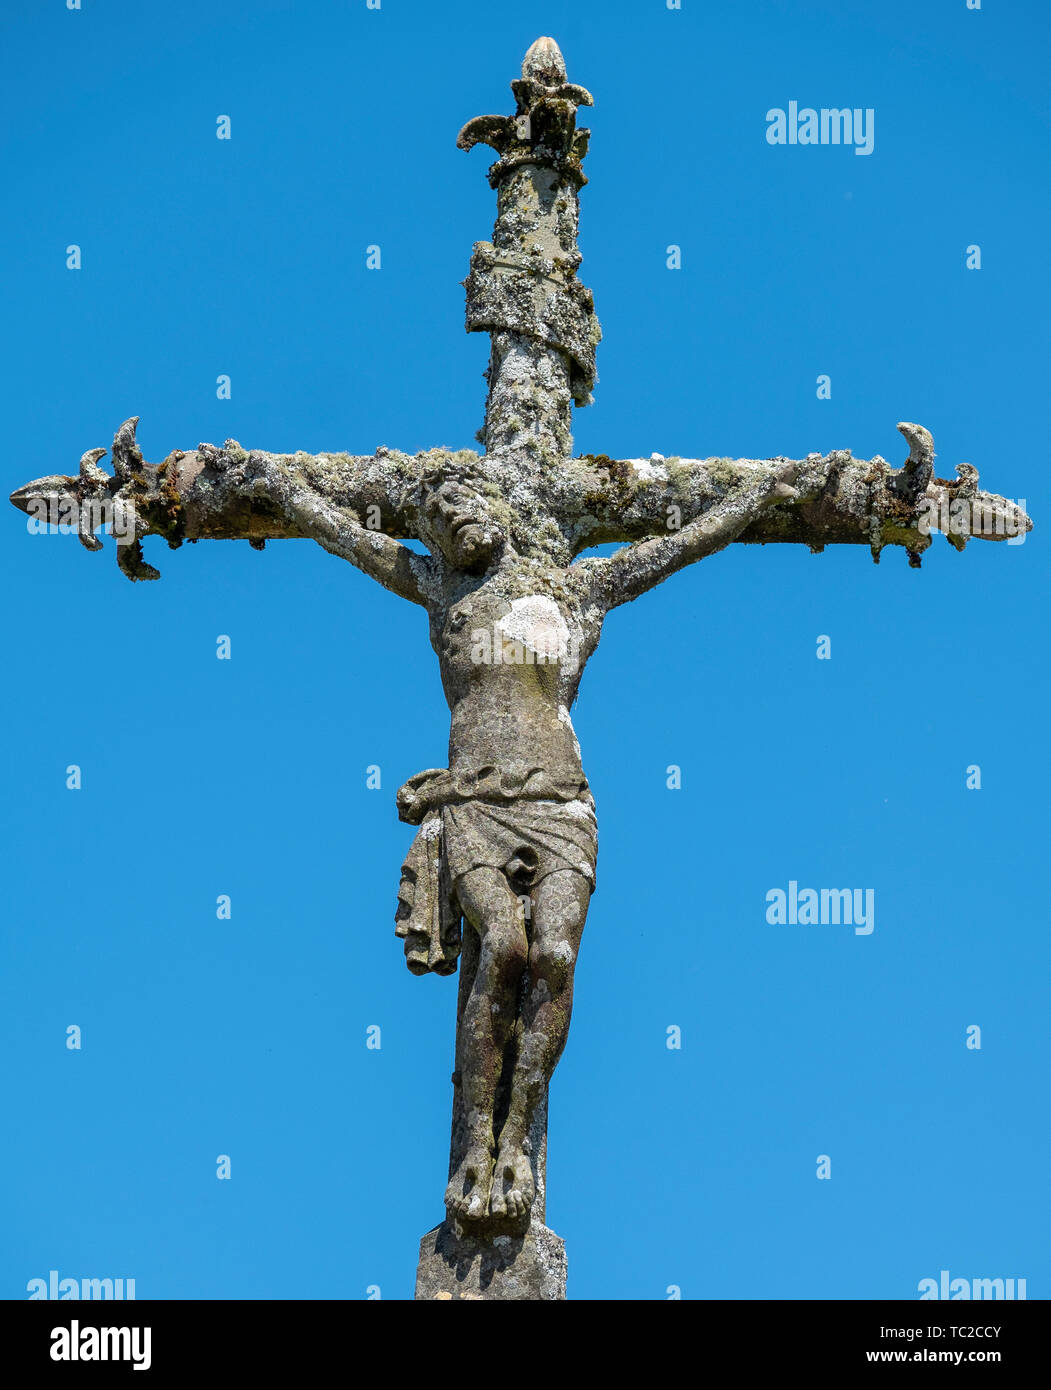 Stone statue of Christ on the cross against a blue sky at a cemetery in La Feuillée, Brittany, France. Stock Photo